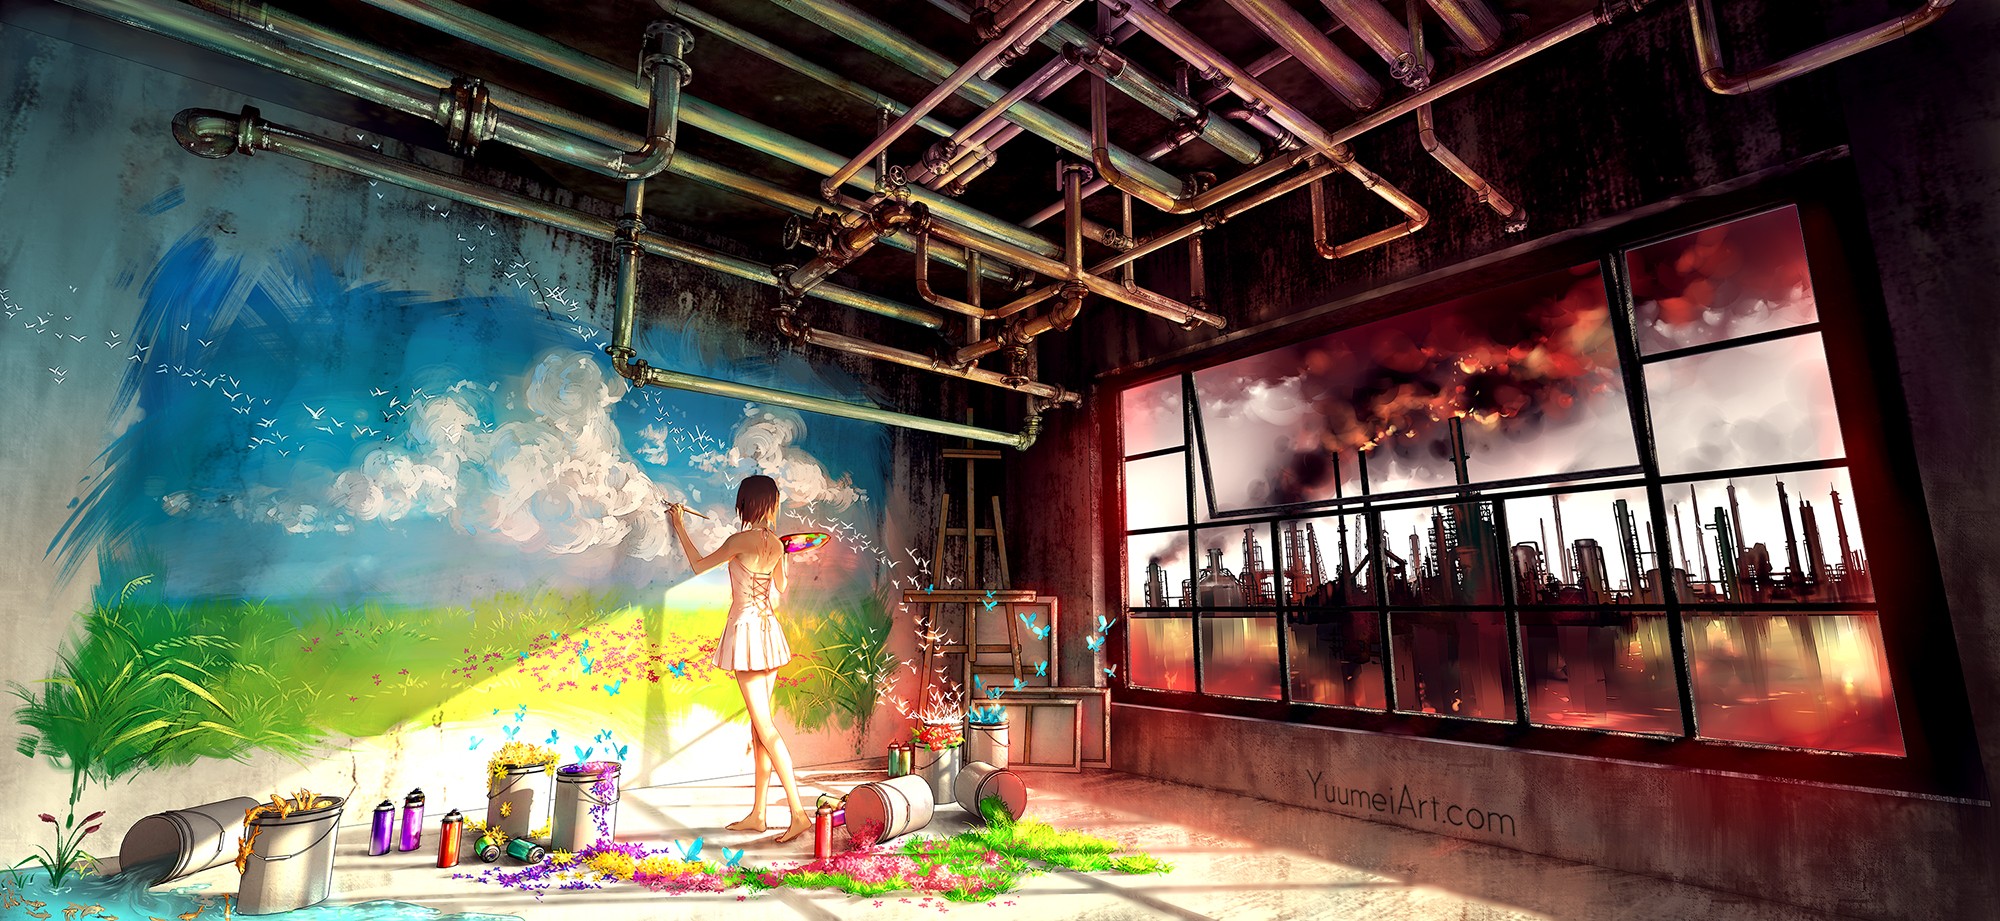 Anime 2000x921 Yuumei pipes room industrial city painters contrast colorful painting cityscape clouds anime girls pollution women indoors indoors DeviantArt